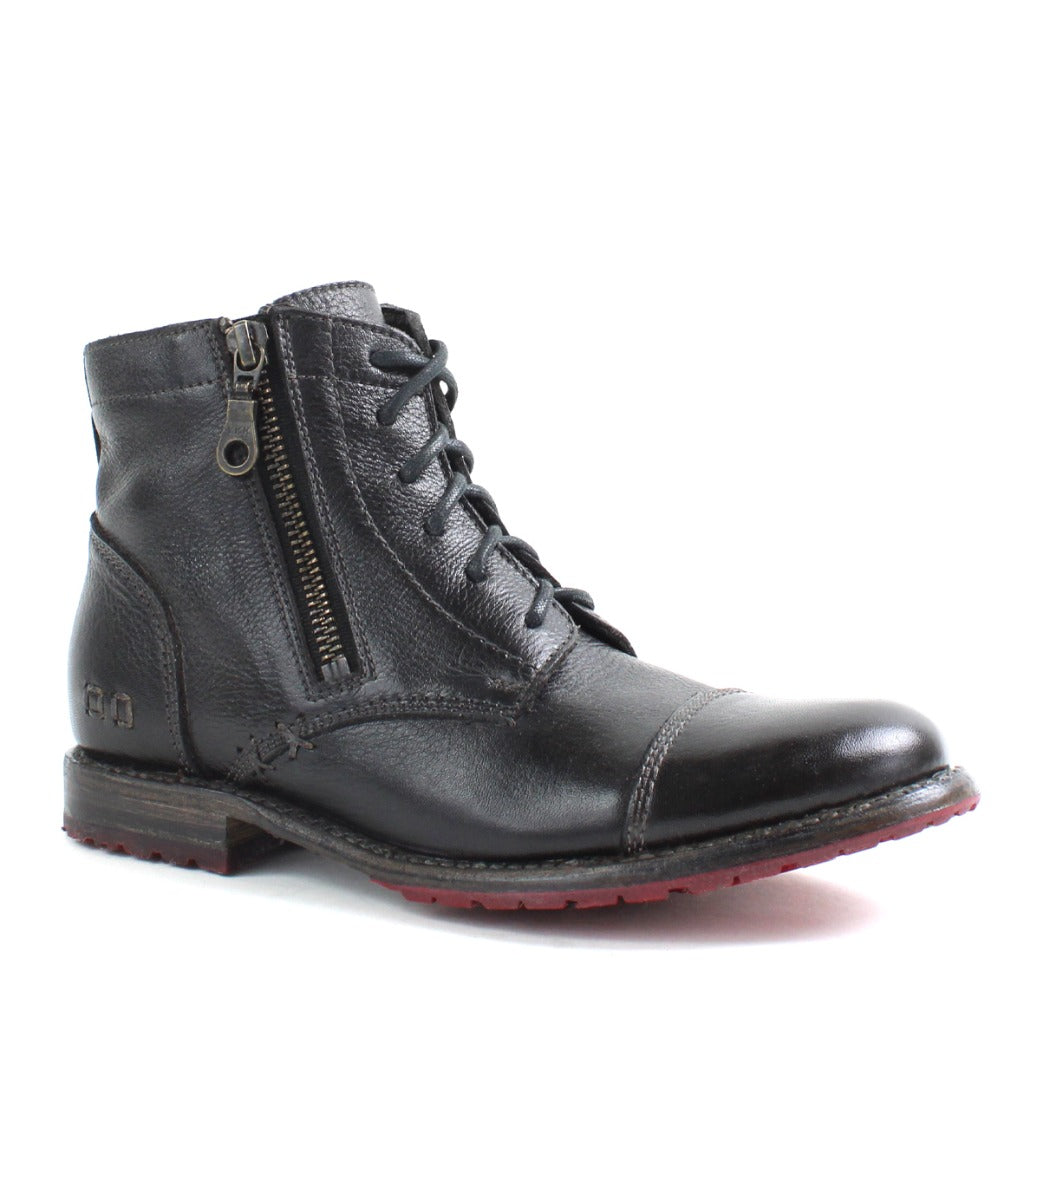 A women's Bonnie II black leather boot with a red sole by Bed Stu.